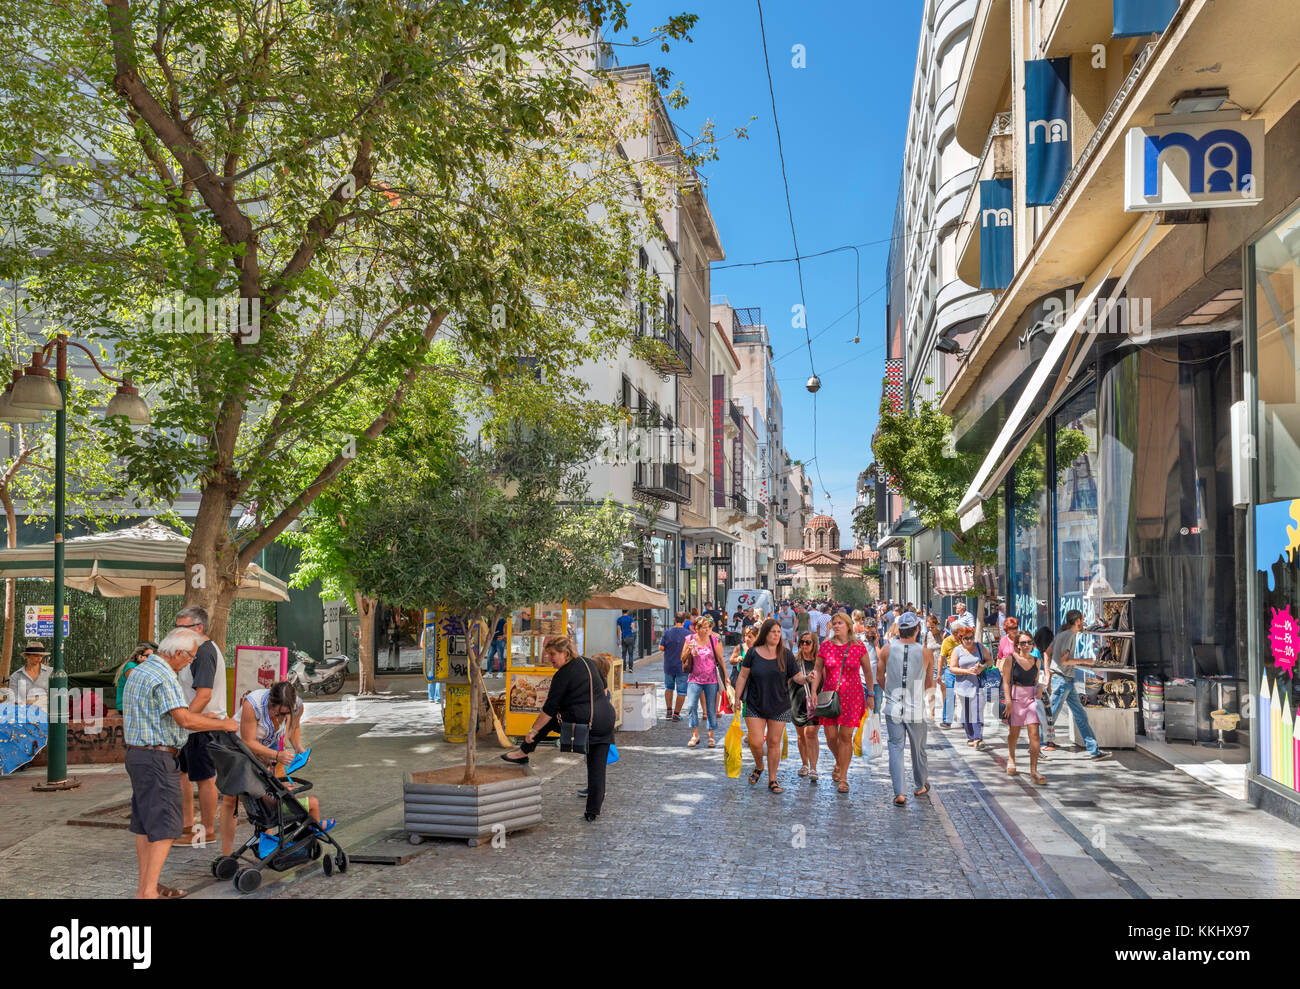 Ermou Street High Resolution Stock Photography and Images - Alamy